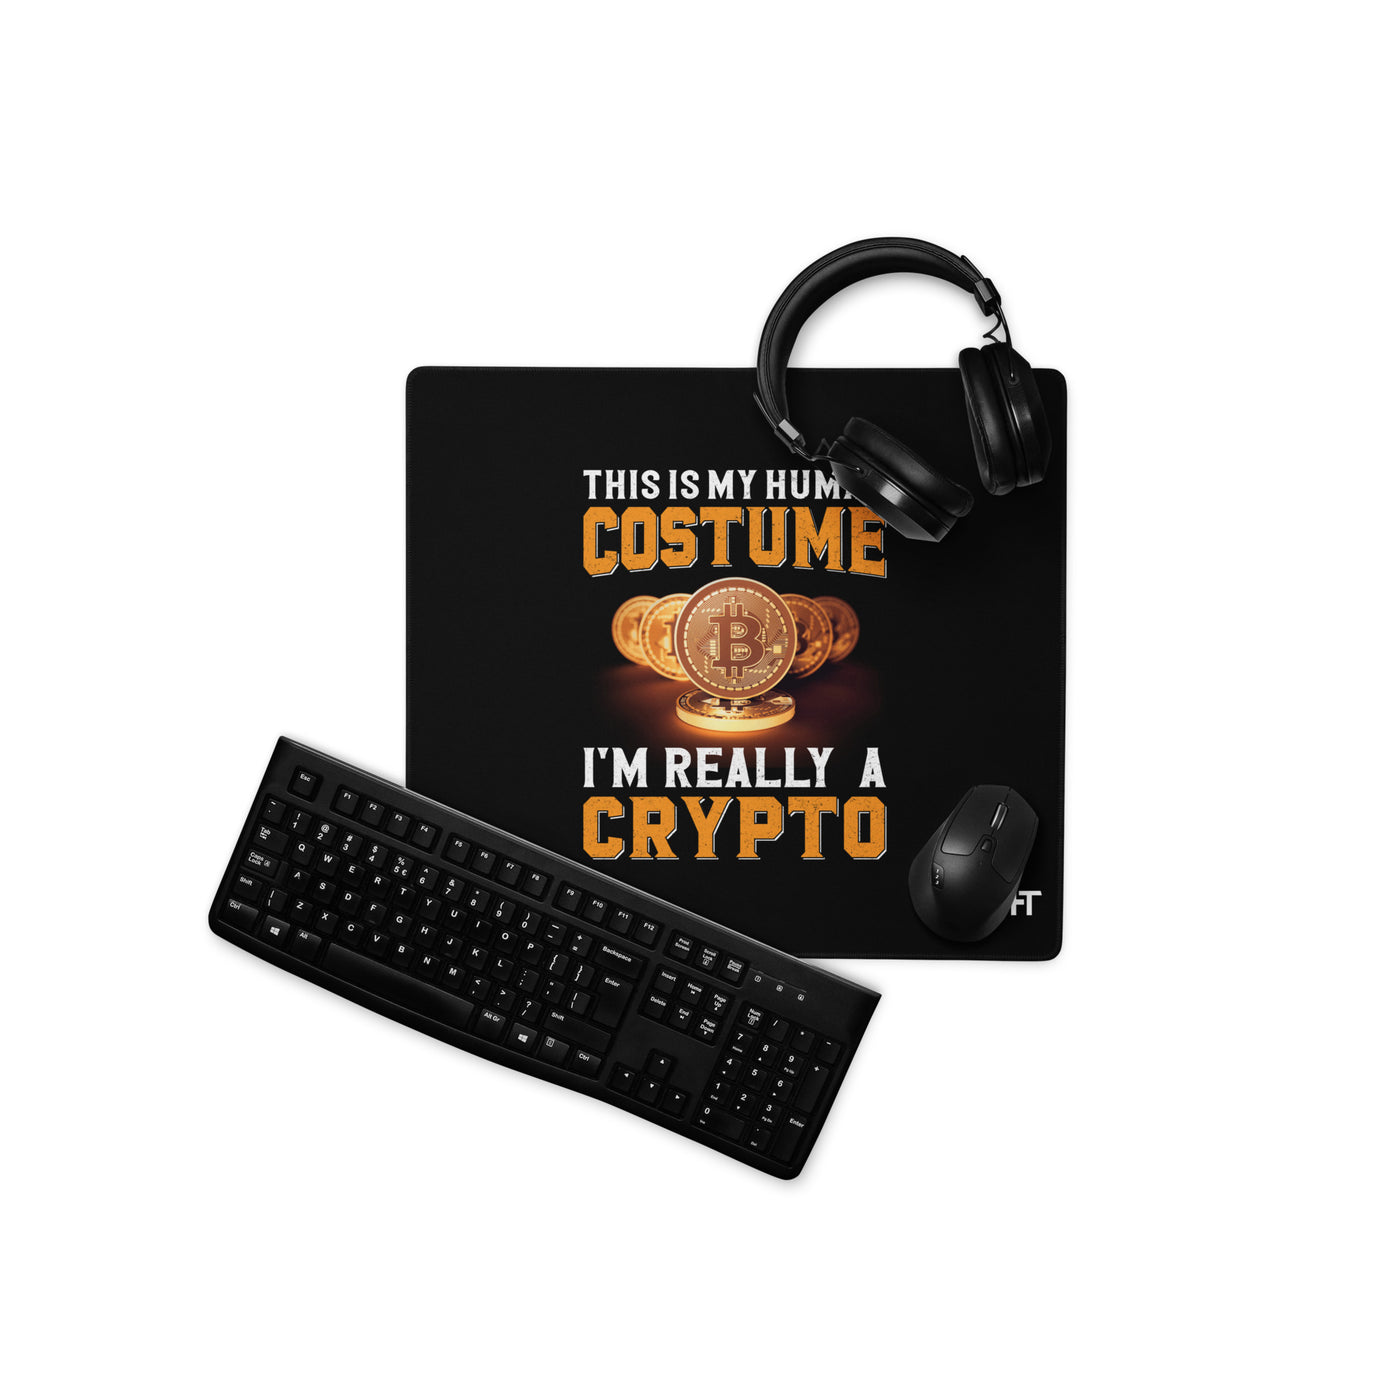 This is my Human Costume, I am a really a Crypto - Desk Mat